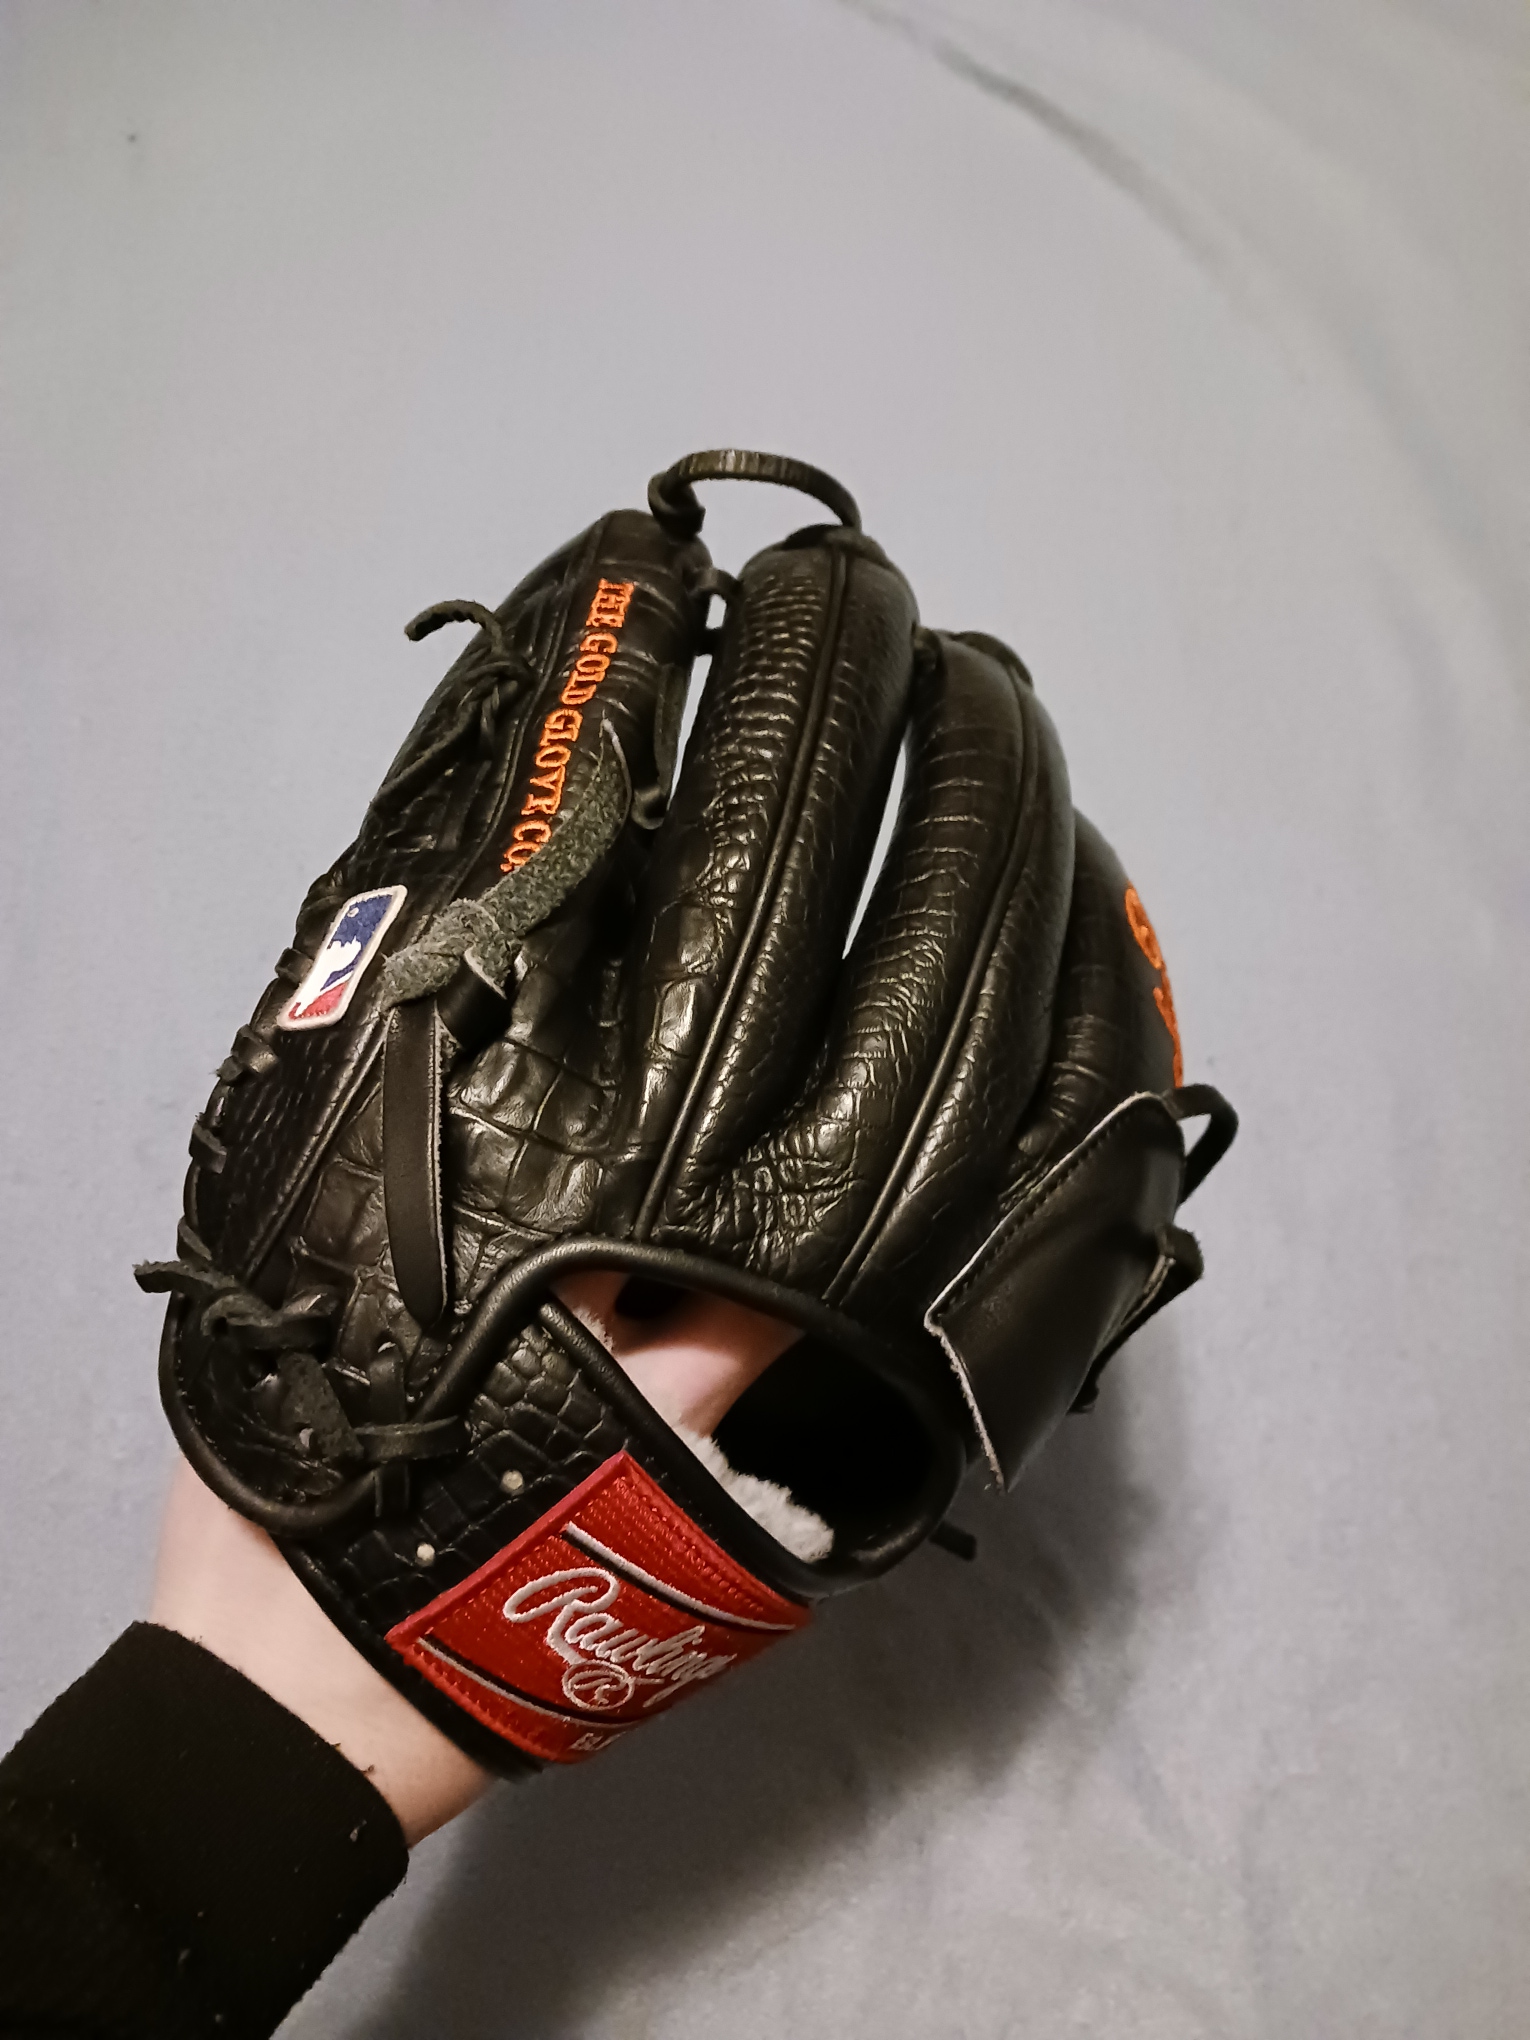 New Rawlings Right Hand Throw Pitcher's Pro Preferred Baseball Glove 11.75"